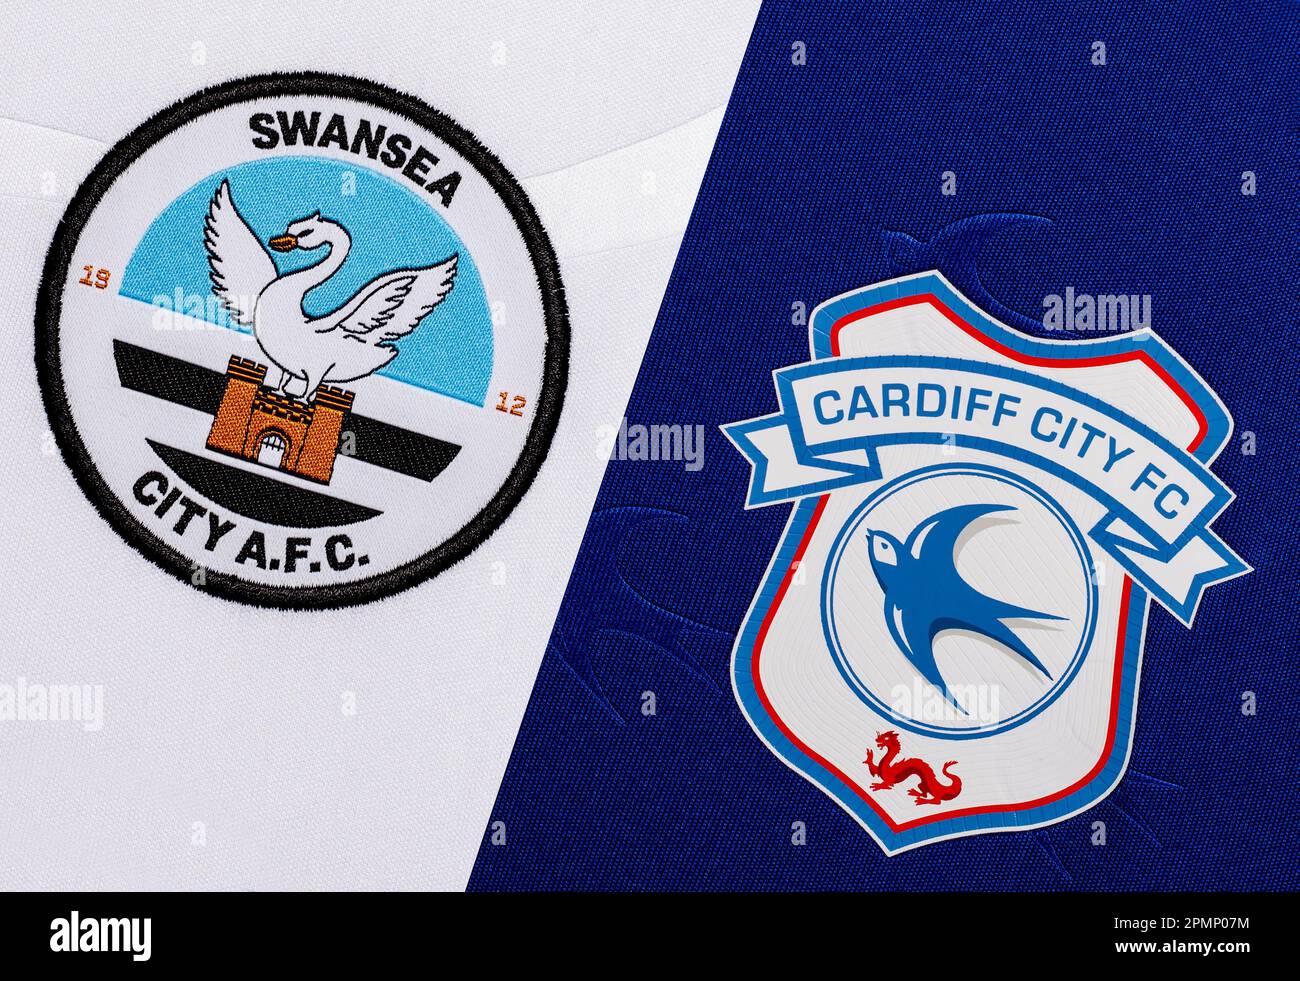 Come up of Swansea City and Cardiff City badge Stock Photo